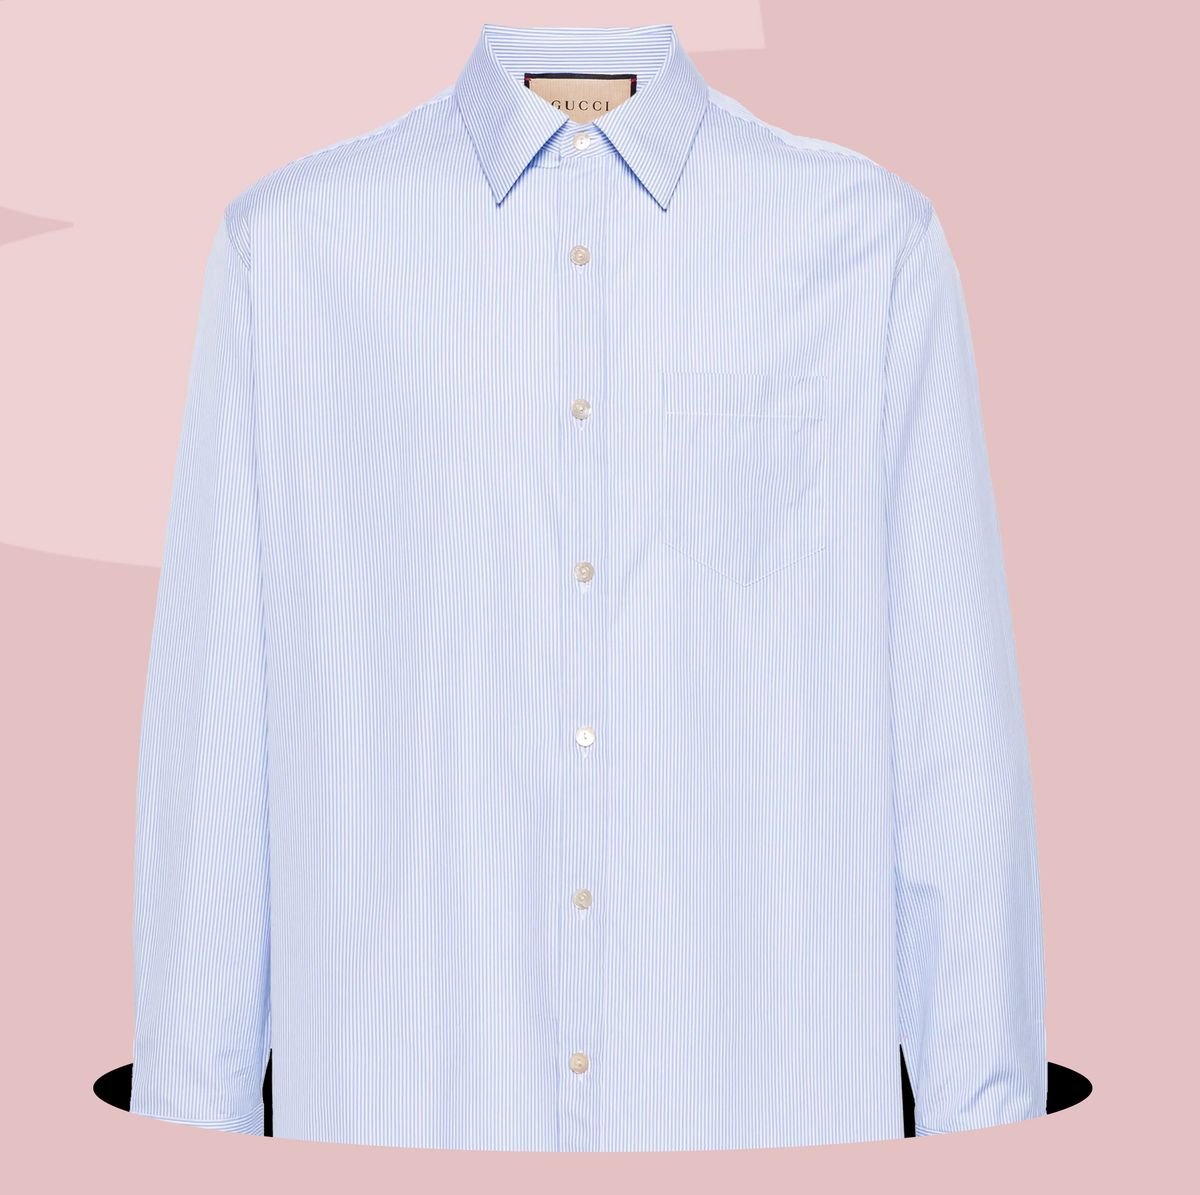 a blue and white shirt